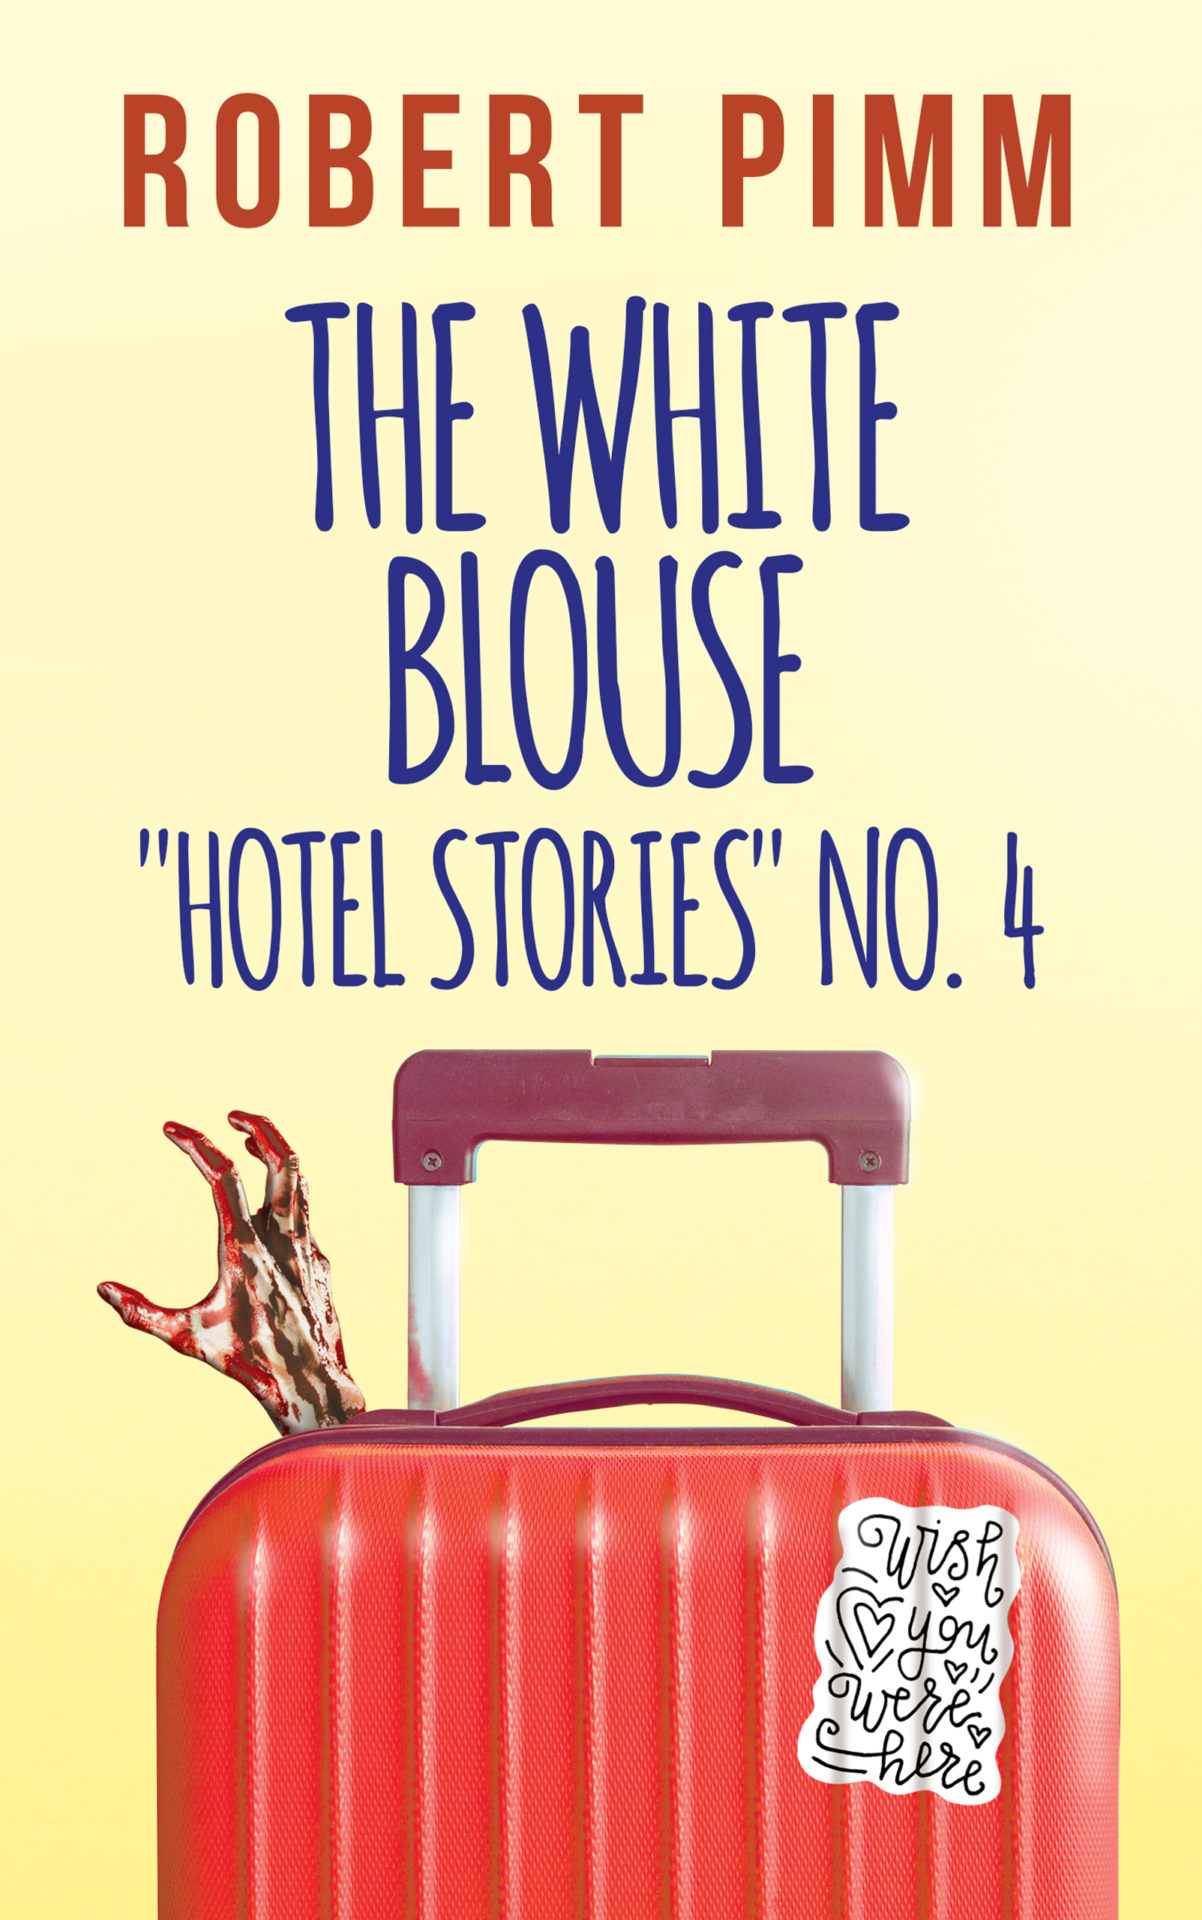 The hotel from hell: The White Blouse